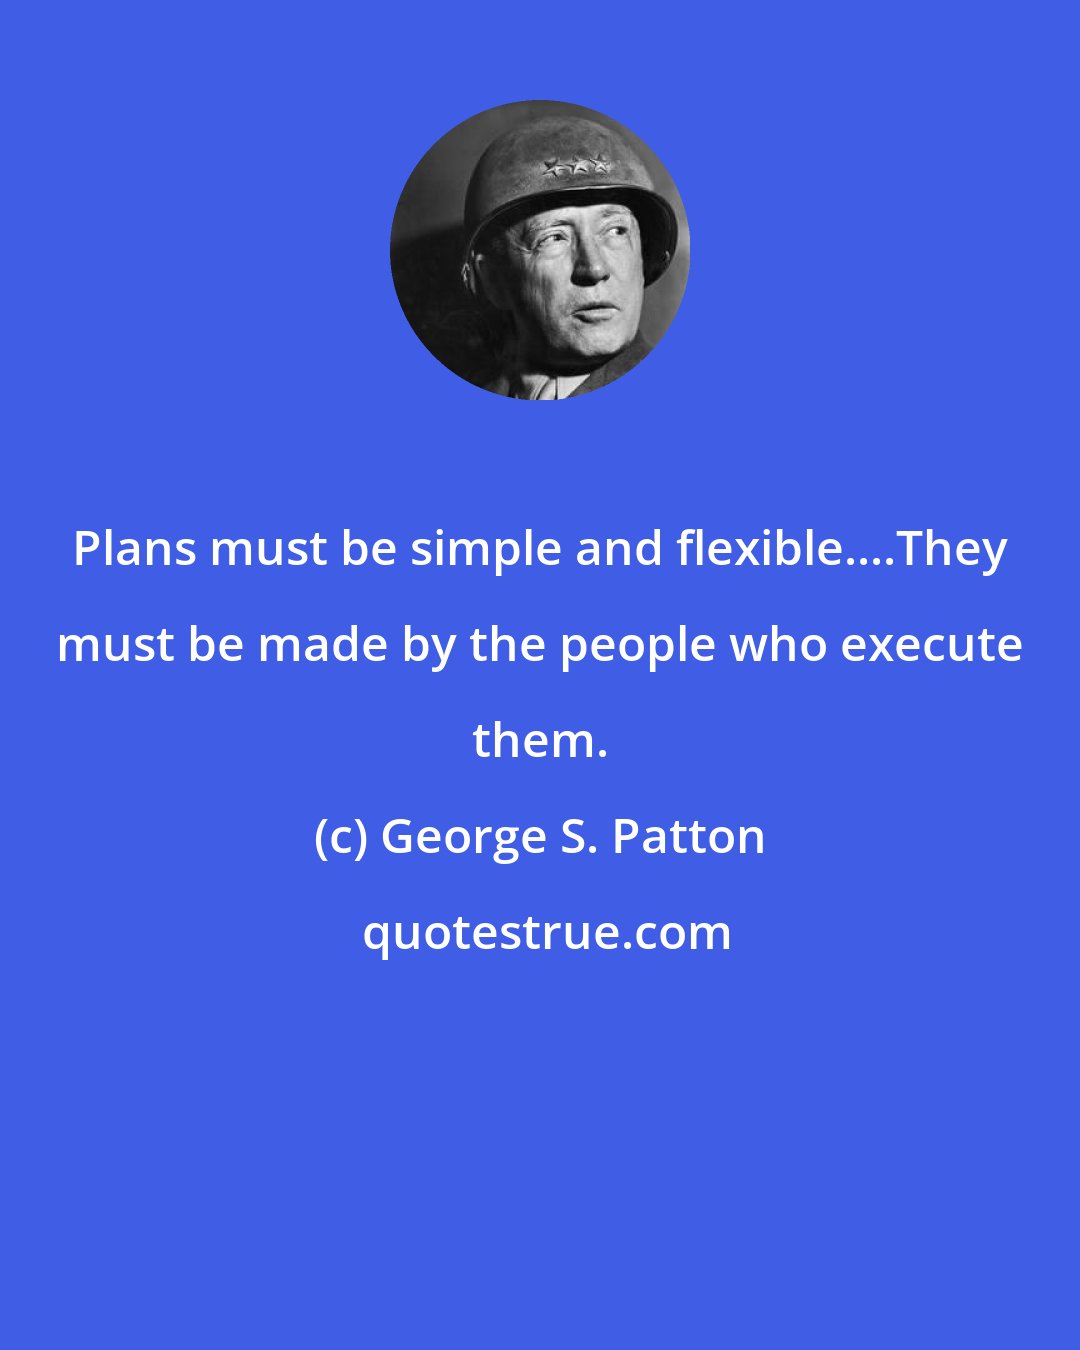 George S. Patton: Plans must be simple and flexible....They must be made by the people who execute them.